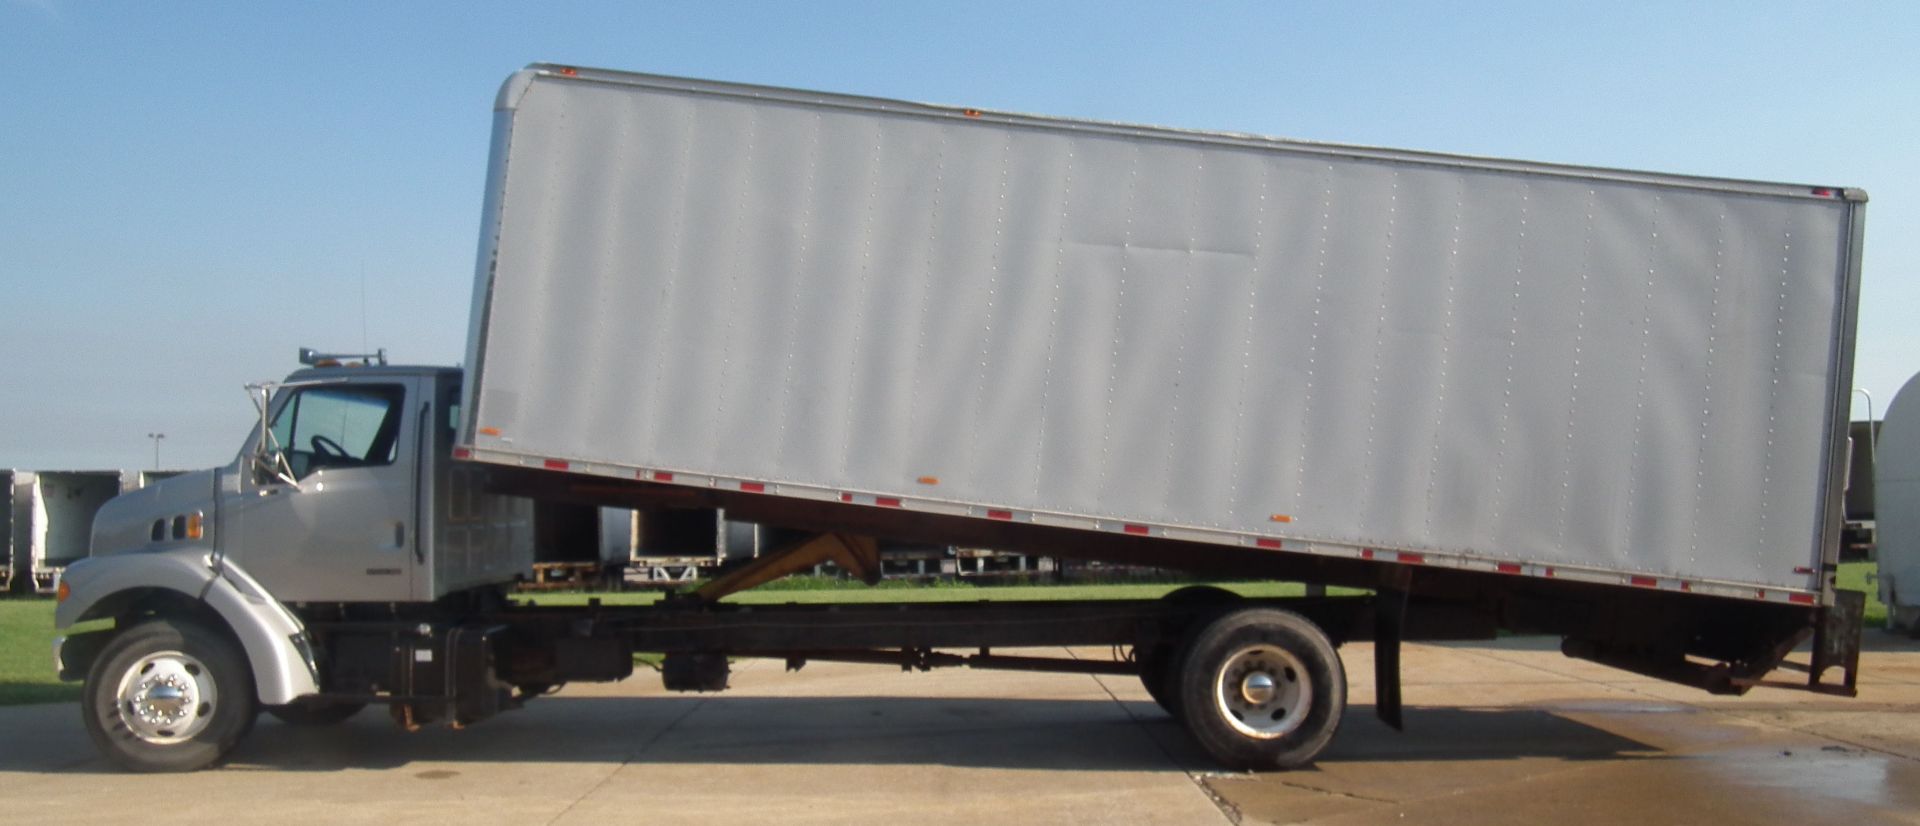 Sterling L7501 Box Truck with Lift Gate and Tilt Bed B3298 - Image 8 of 60